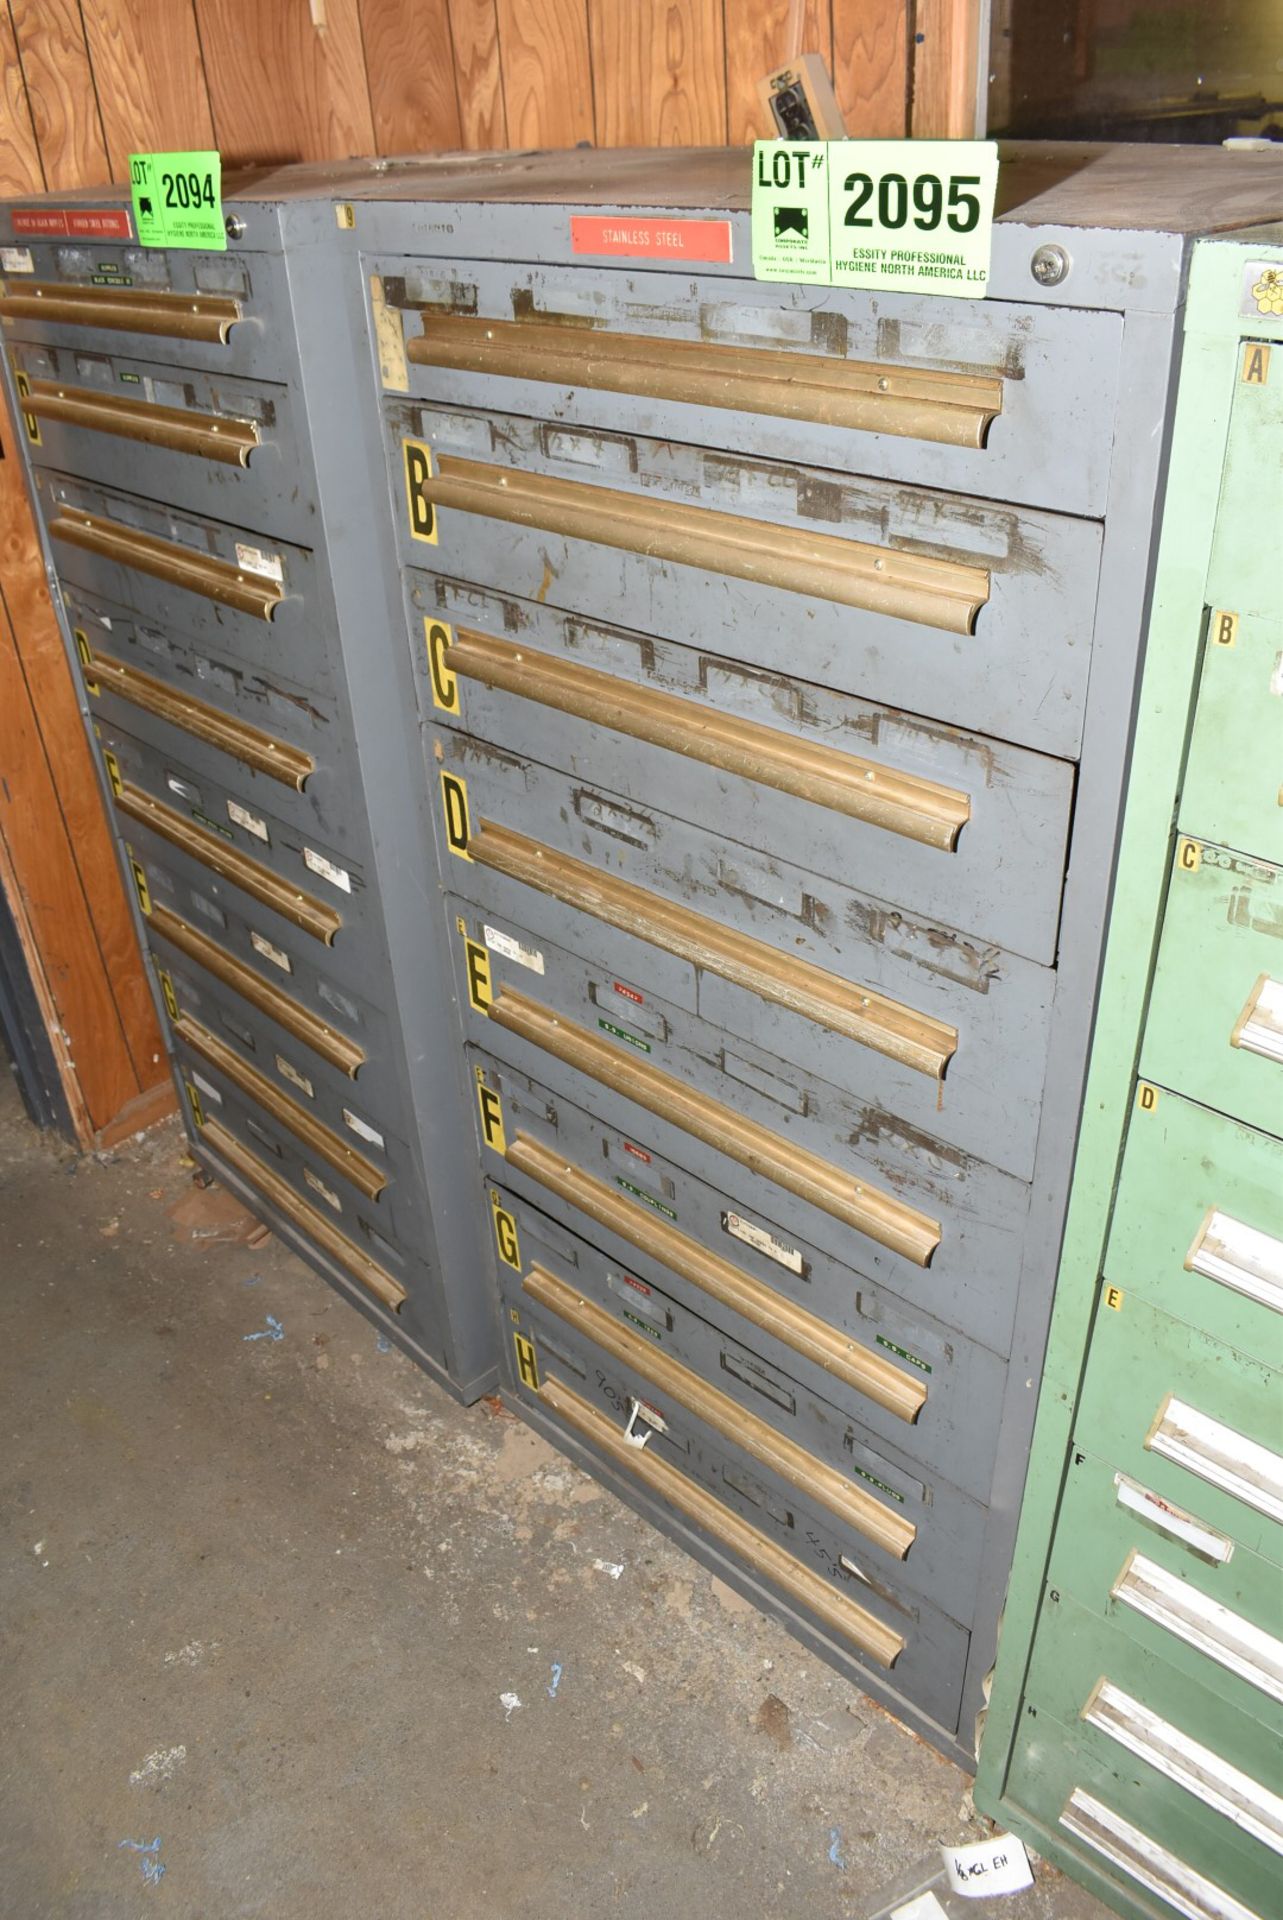 8 DRAWER TOOL CABINET [RIGGING FEES FOR LOT #2095 - $100 USD PLUS APPLICABLE TAXES]